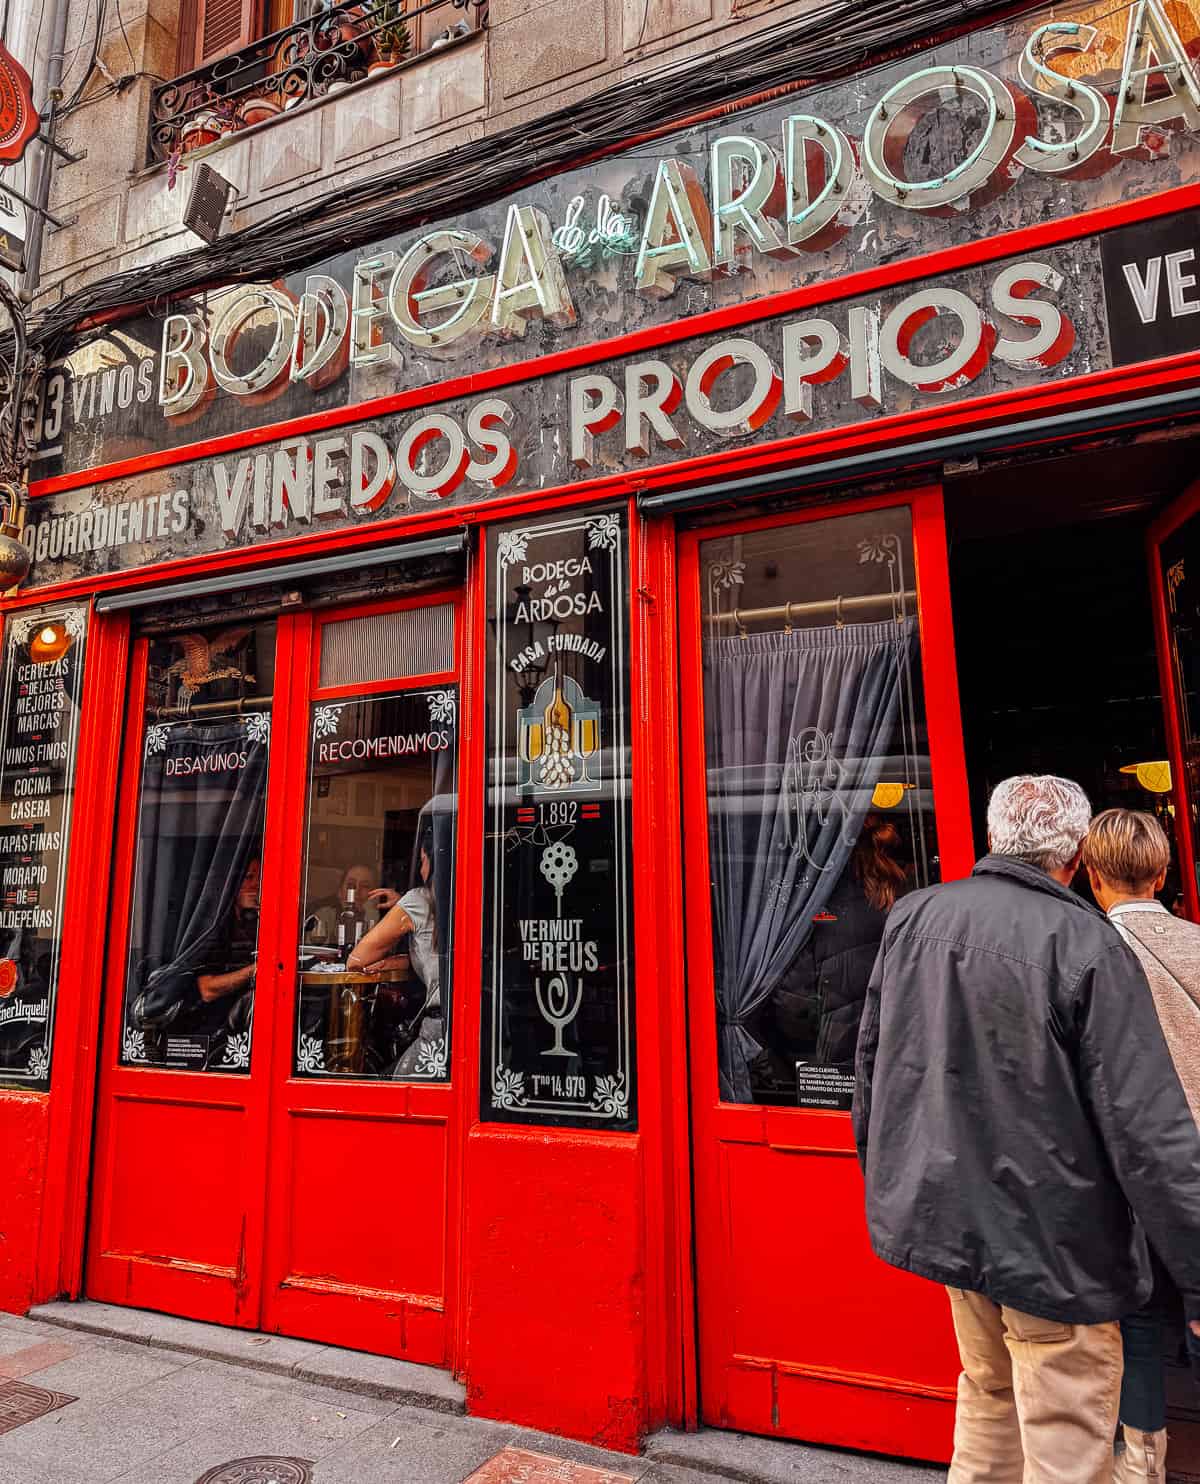 Exterior view of Bodega Ardosa, a vibrant red facade with large windows, patrons visible inside, and bold signage promoting wines and vermouths